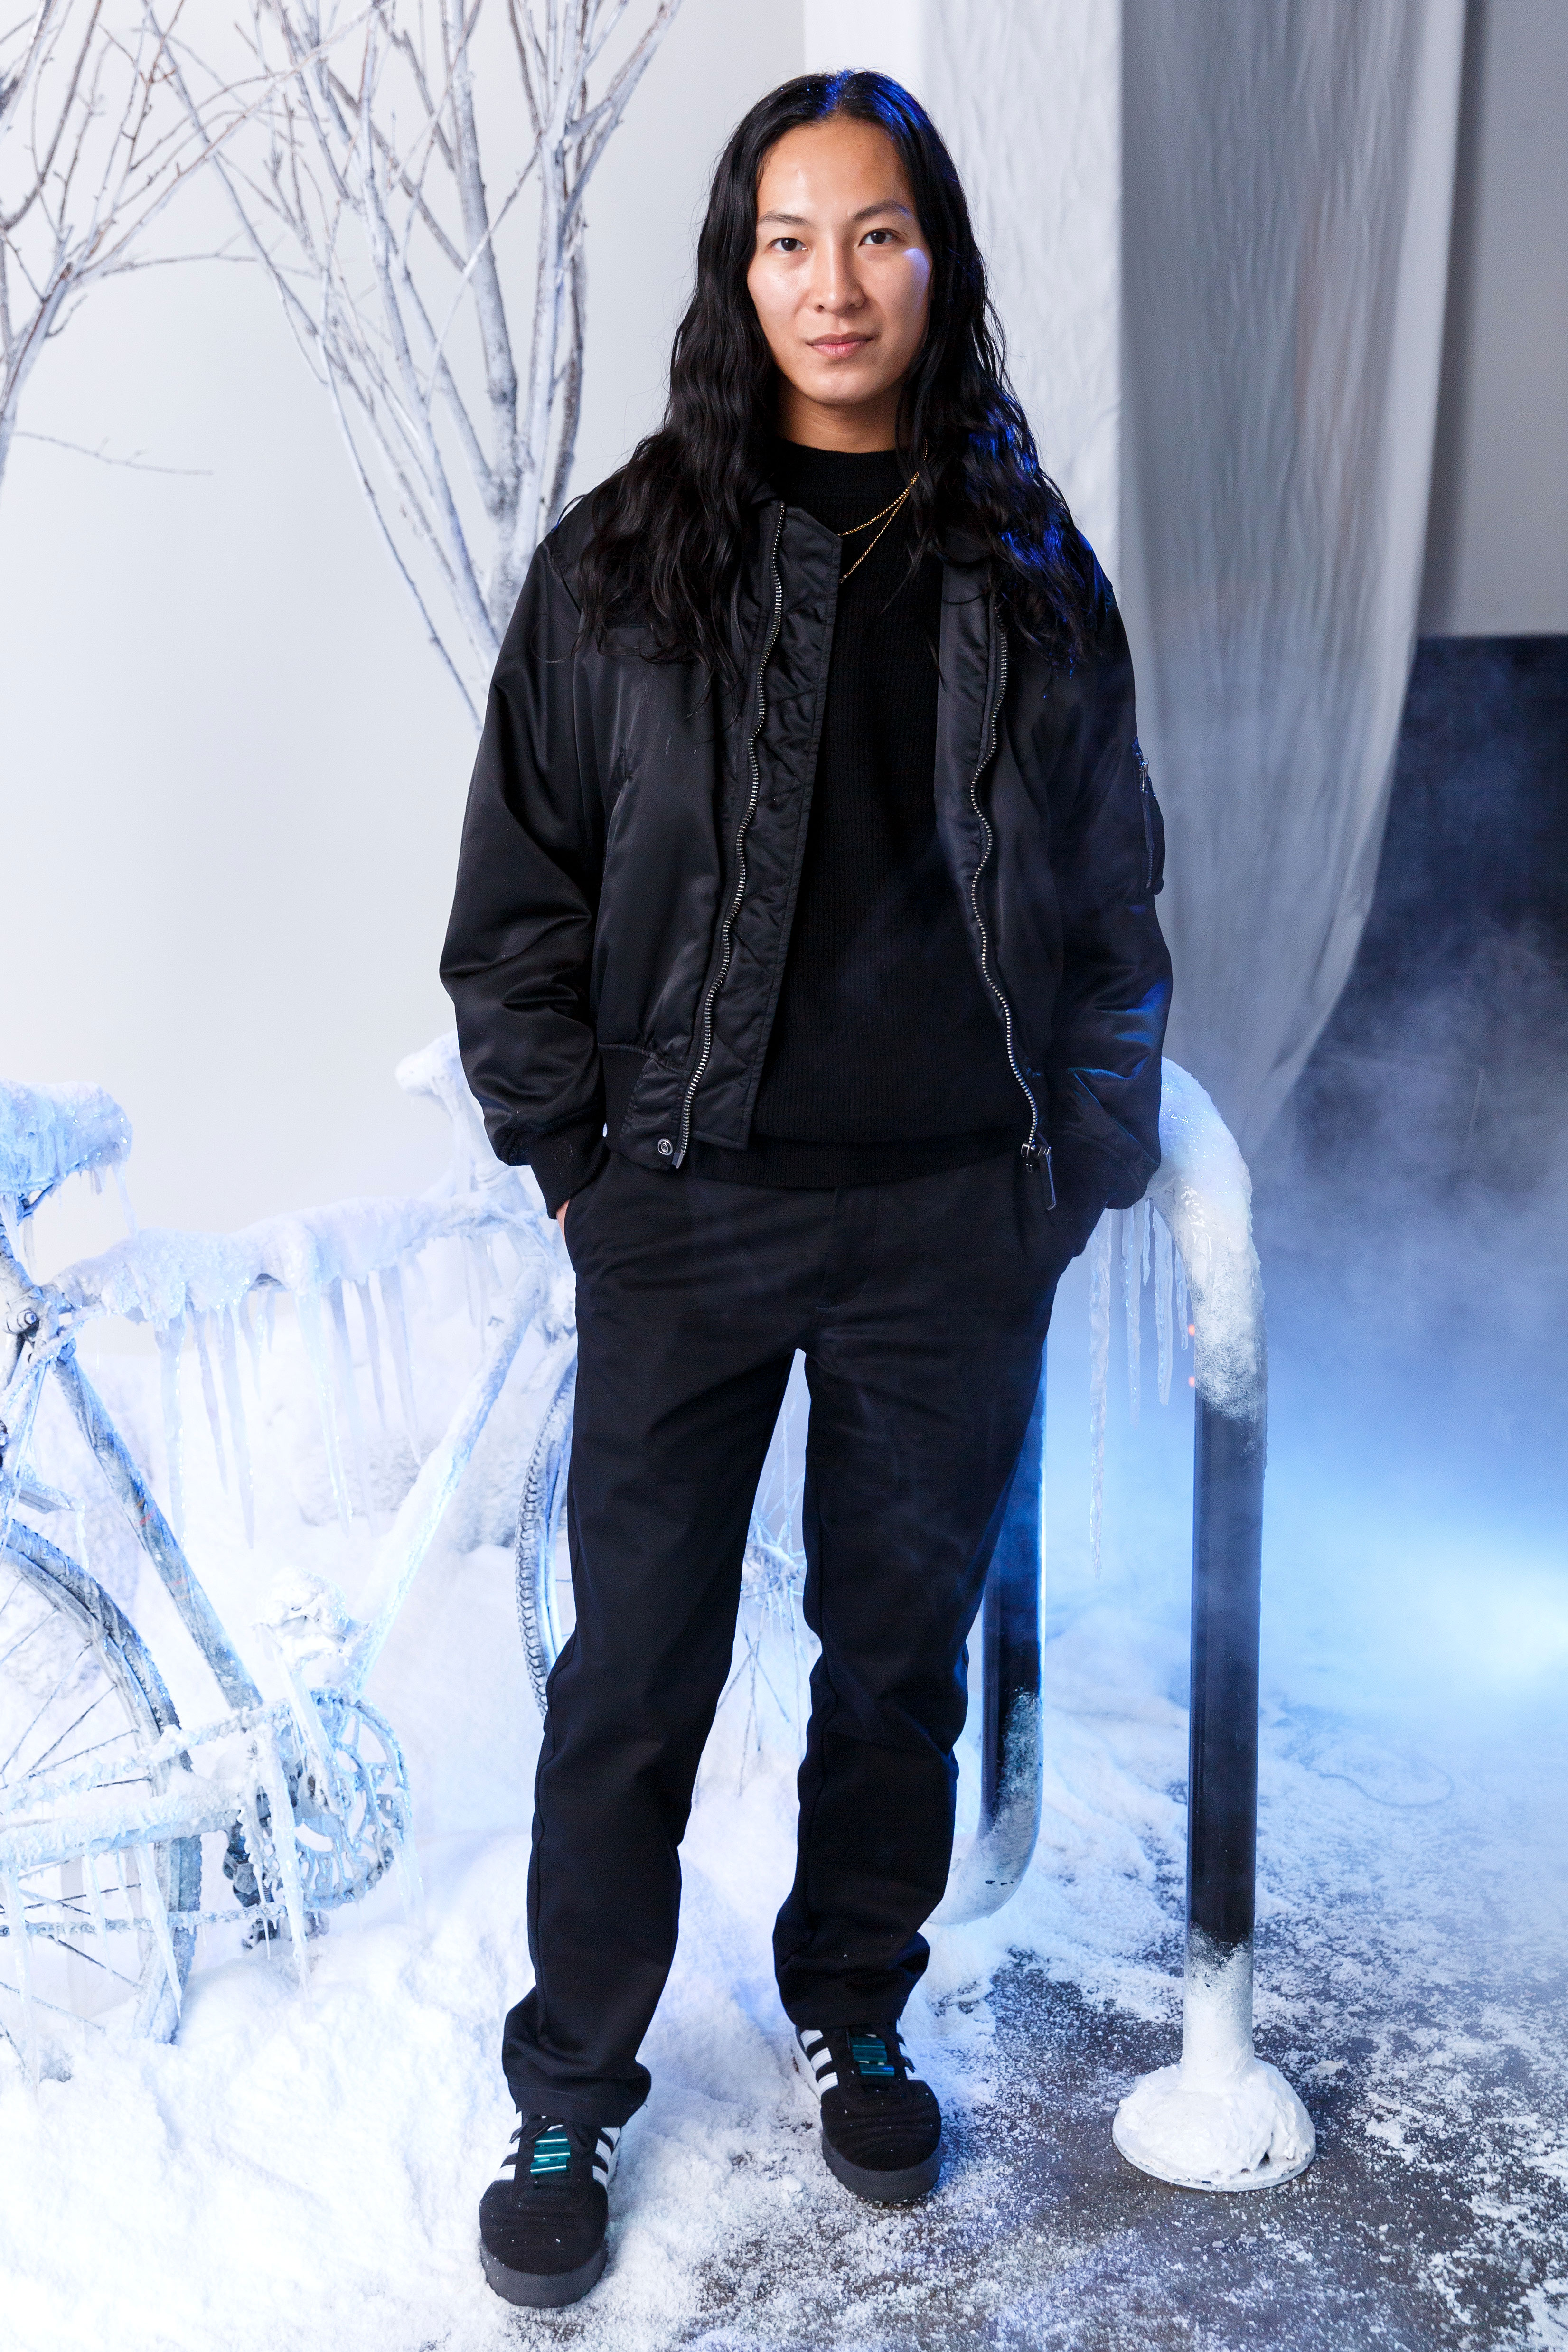 Alexander Wang Designed a Line for Uniqlo's Heattech, and